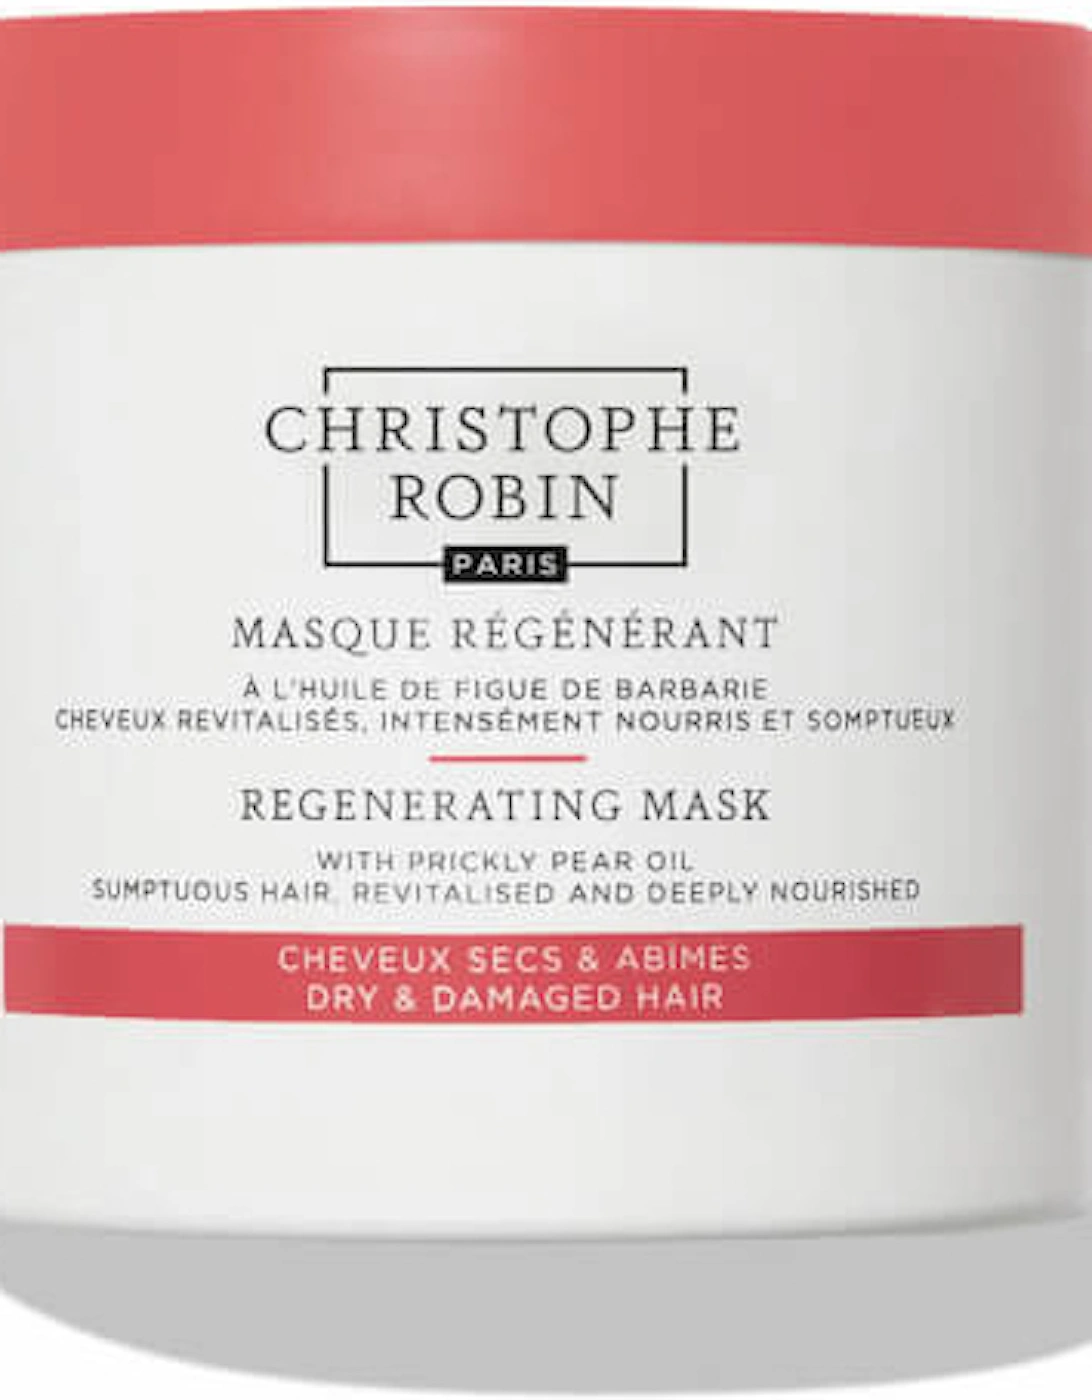 Regenerating Mask with Prickly Pear Oil 250ml - Christophe Robin, 2 of 1